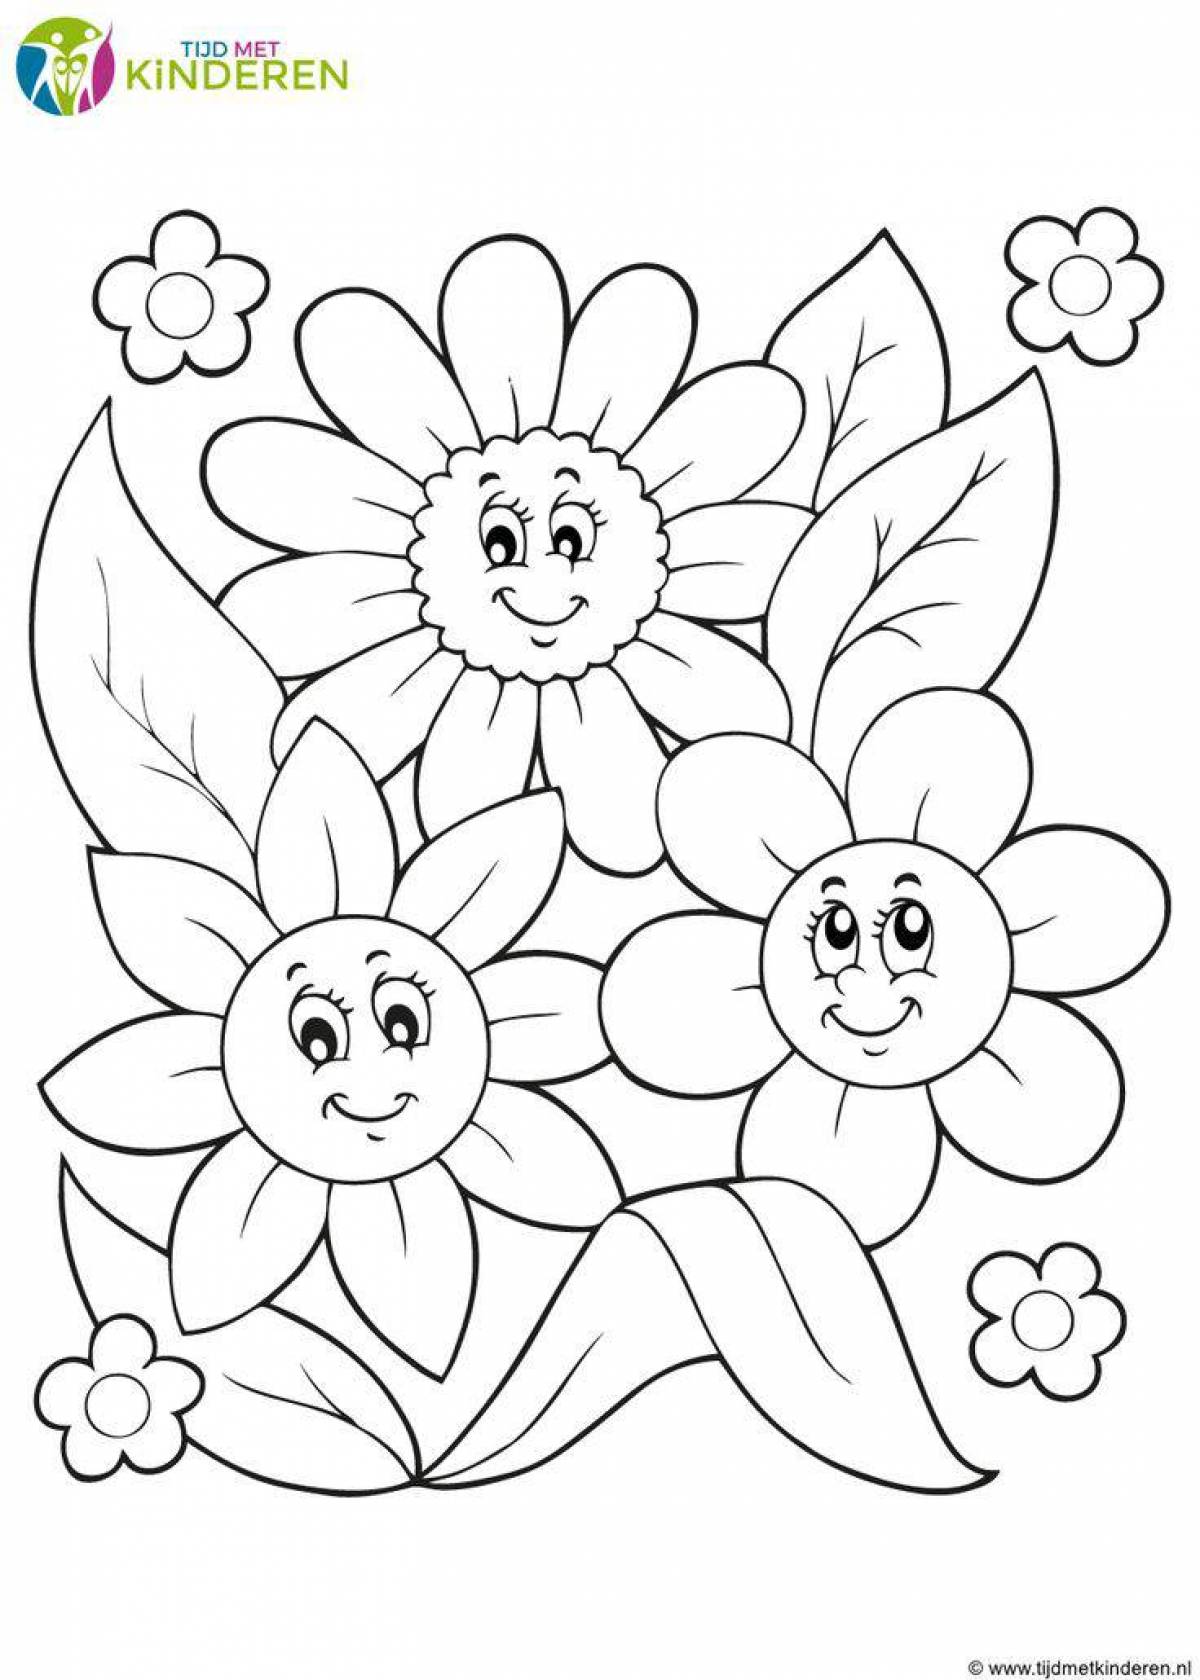 Sweet coloring flower for children 3-4 years old